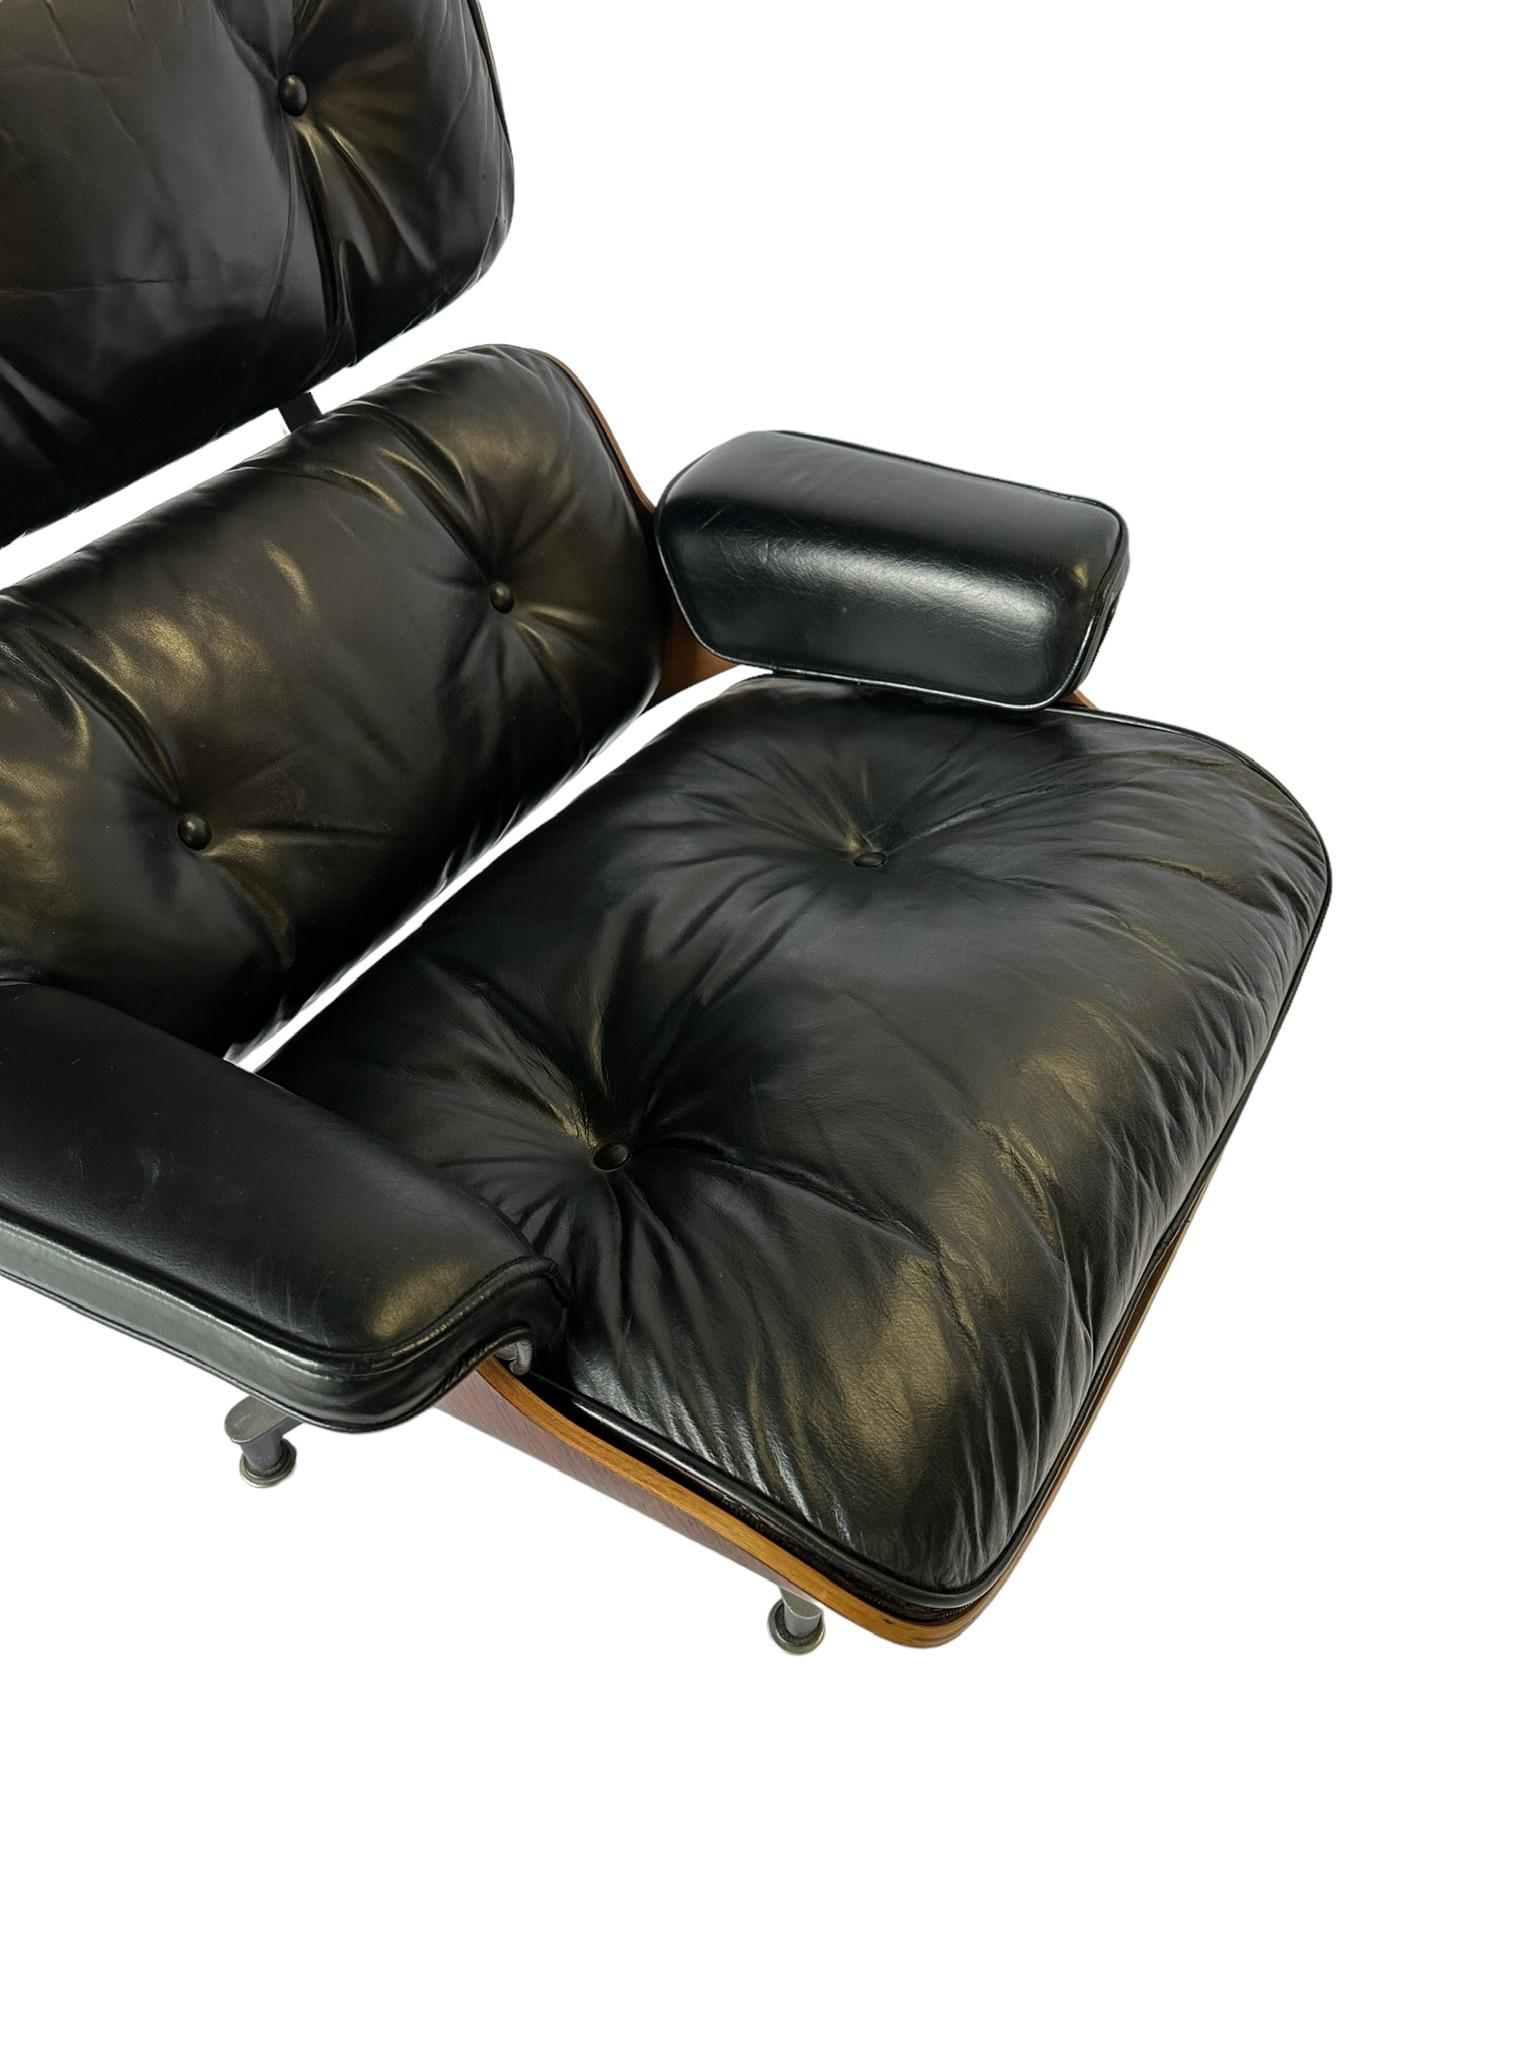 Restored Herman Miller Eames Lounge Chair and Ottoman 8